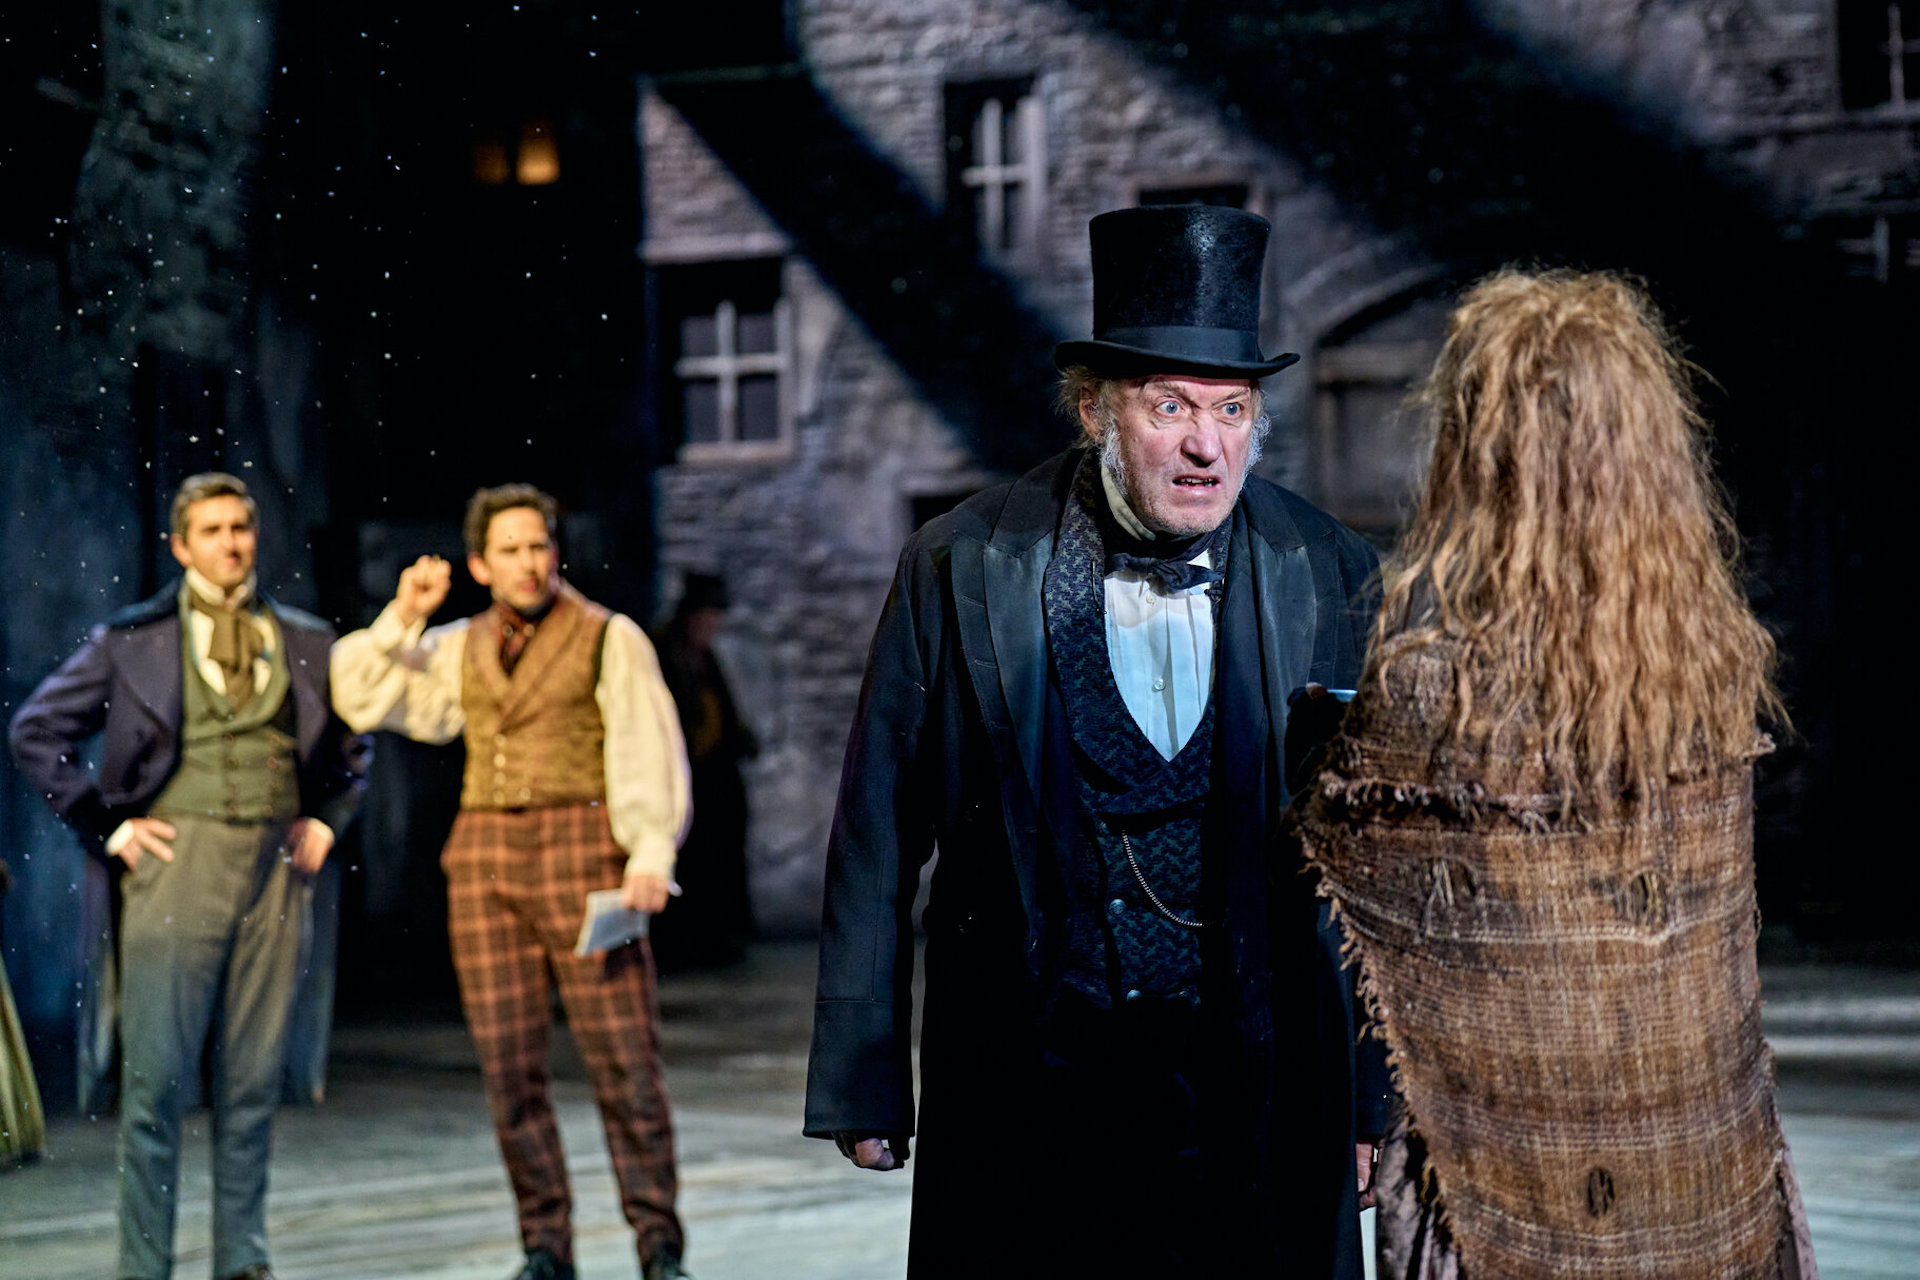 A Christmas Carol, RSC, Stratford review family show eases back the